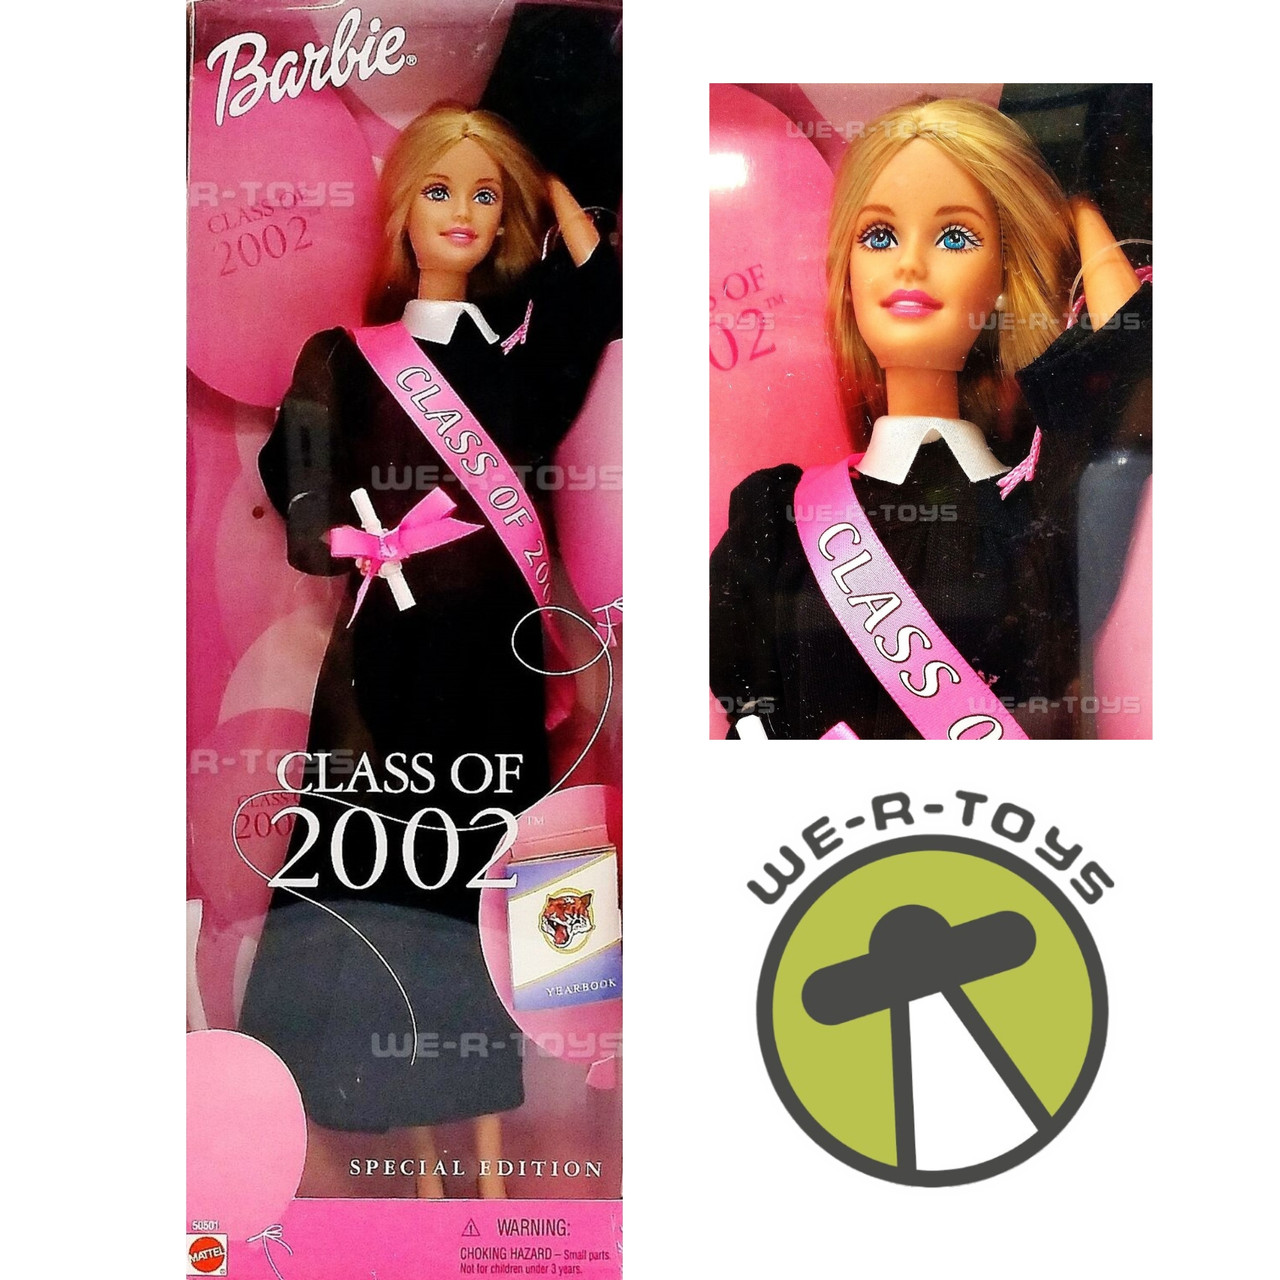 Barbie Class of 2002 Special Edition Doll Black Graduate Gown Mattel 50501  NRFB